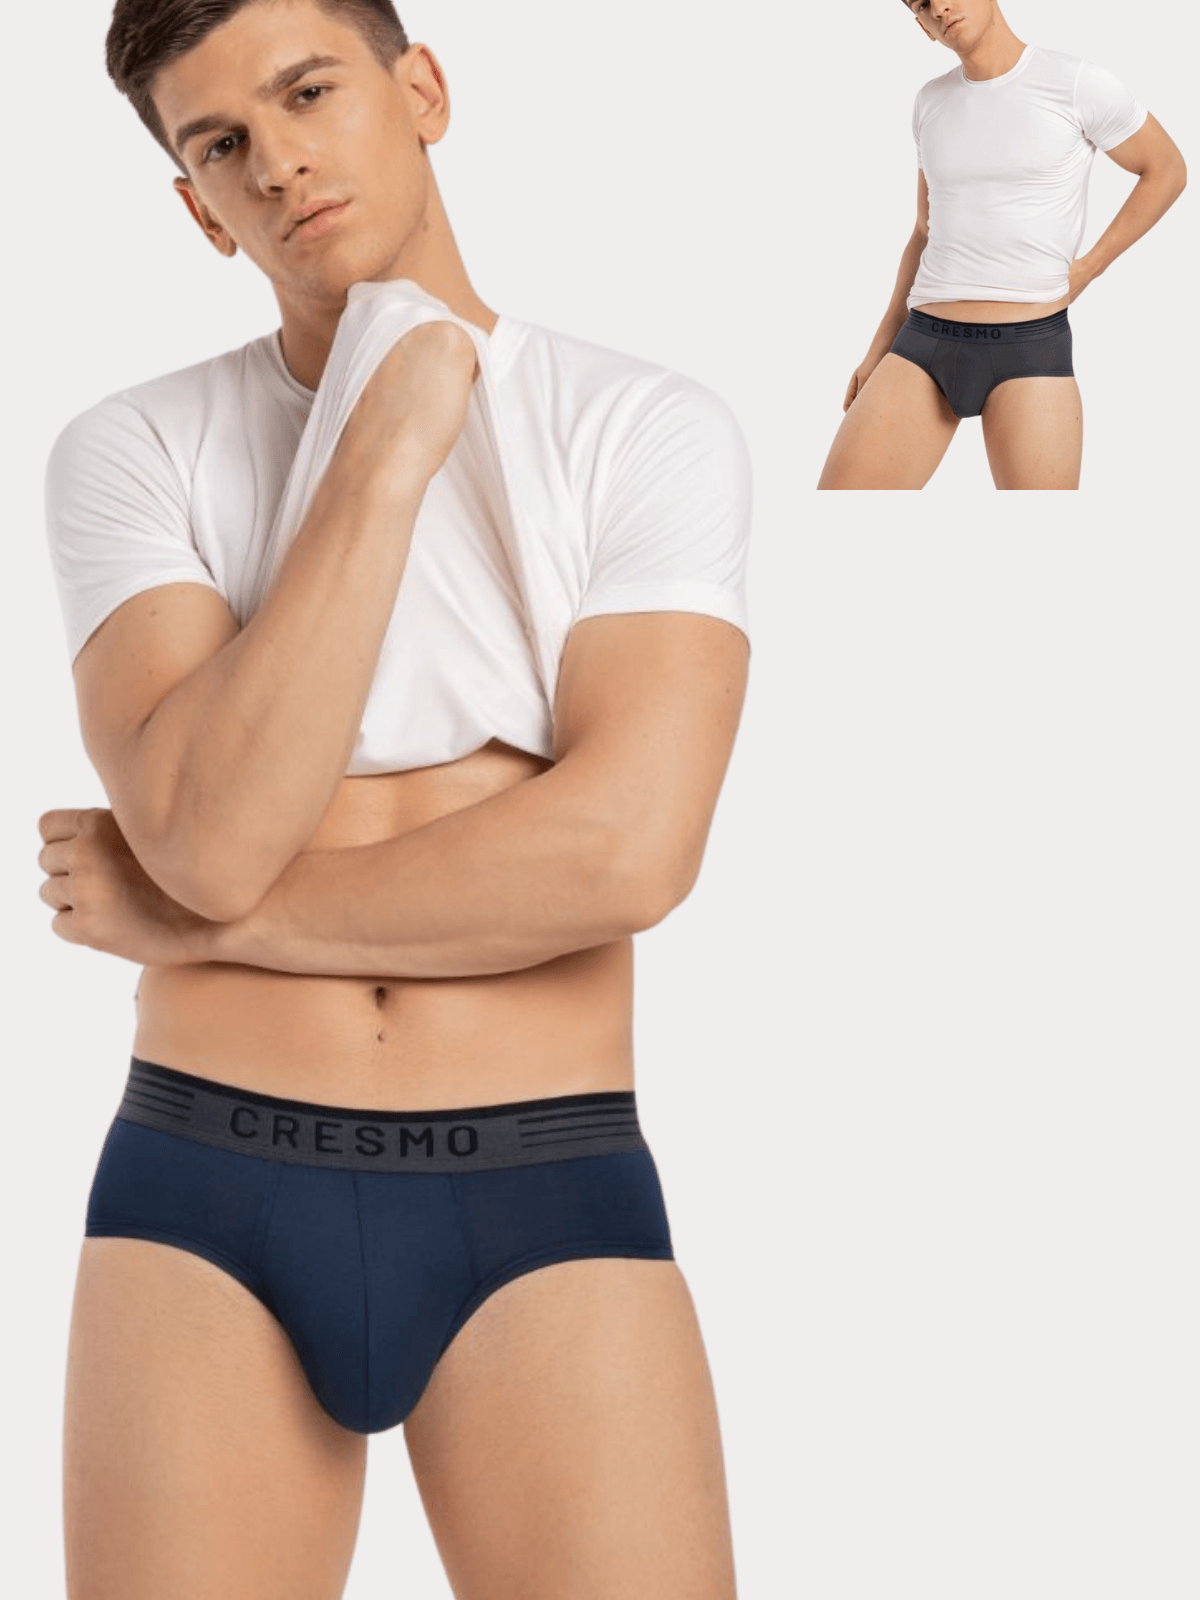 CRESMO | CRESMO Men's Anti-Microbial Micro Modal Underwear Breathable Ultra Soft Comfort Lightweight Brief (Pack of 2)